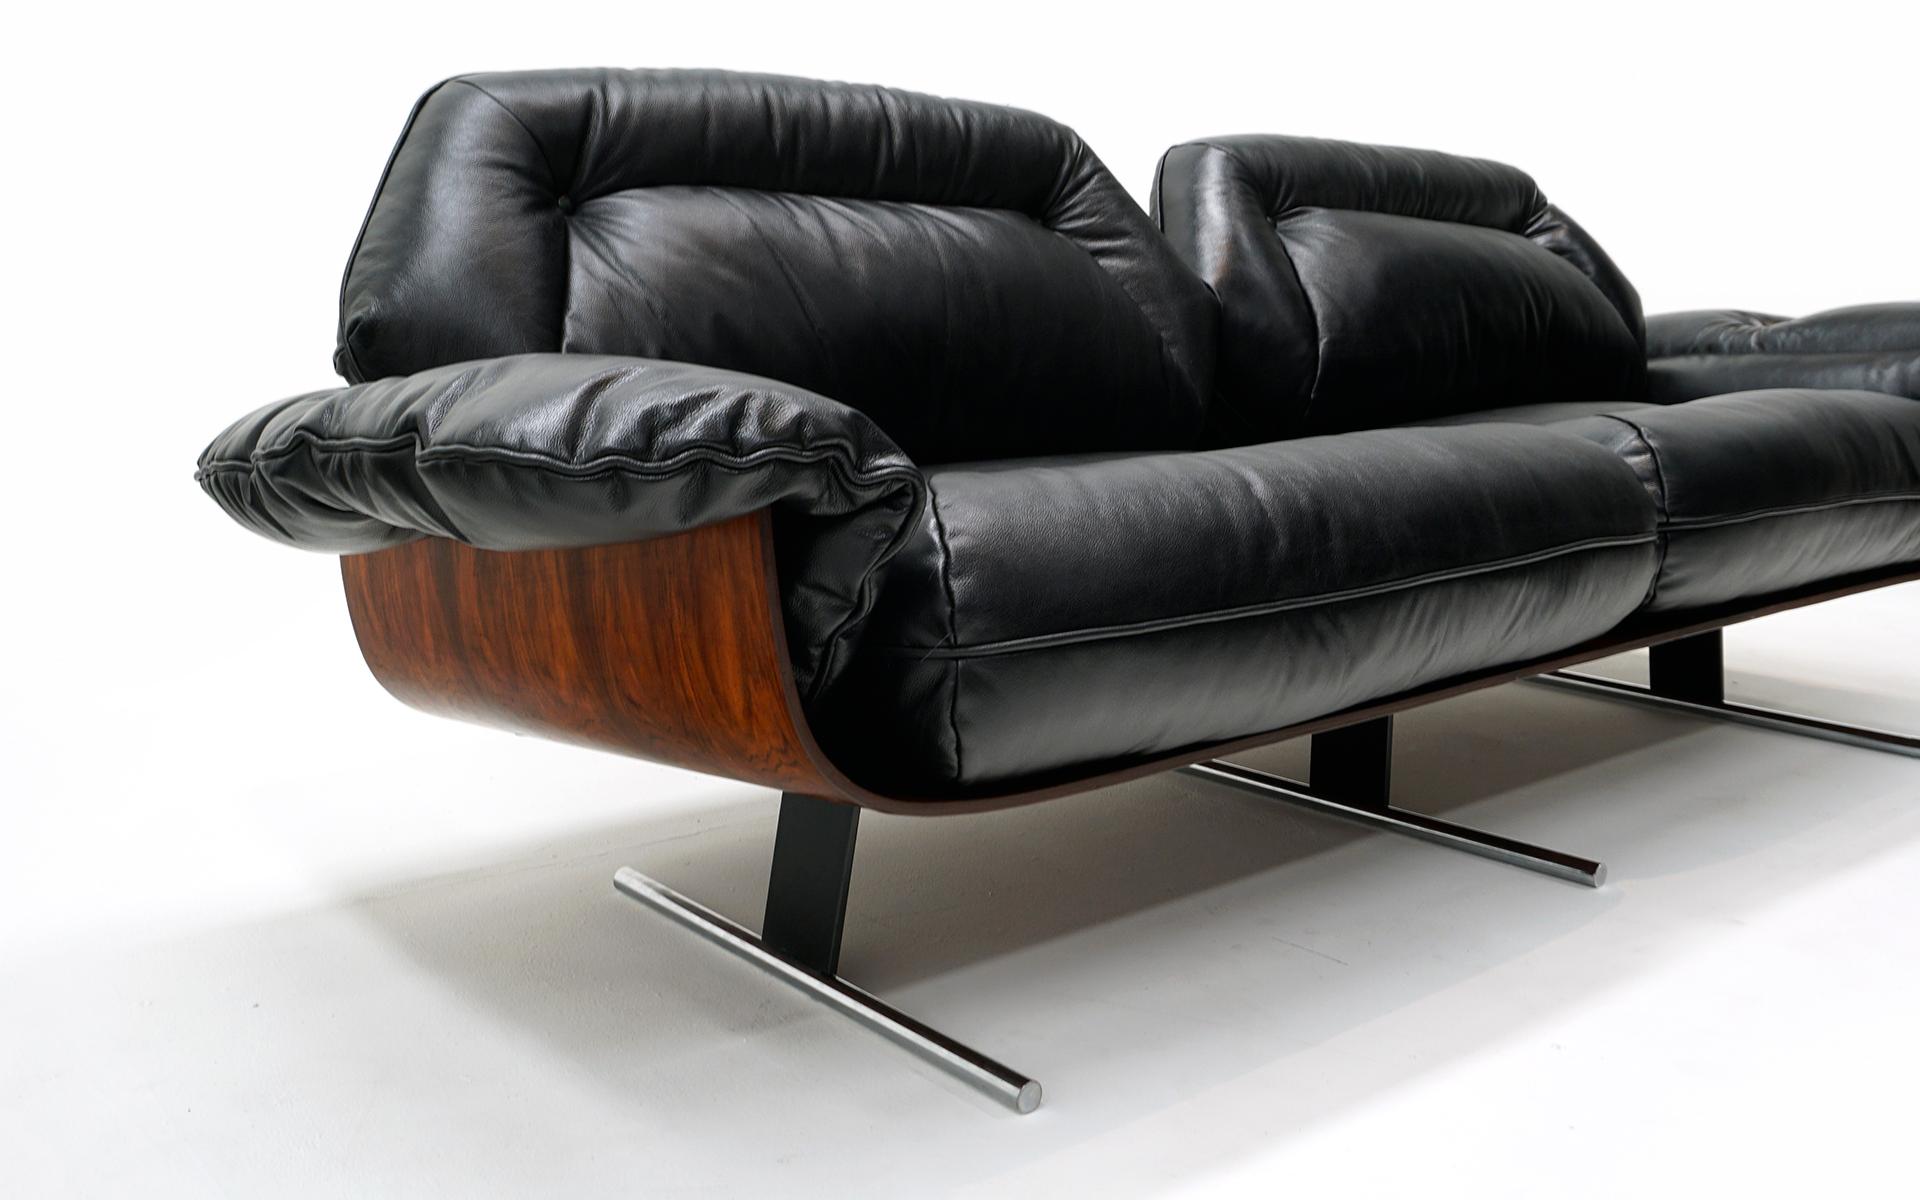 Mid-20th Century Jorge Zalszupin Sofa in Black Leather and Brazilian Rosewood. Great Condition. For Sale